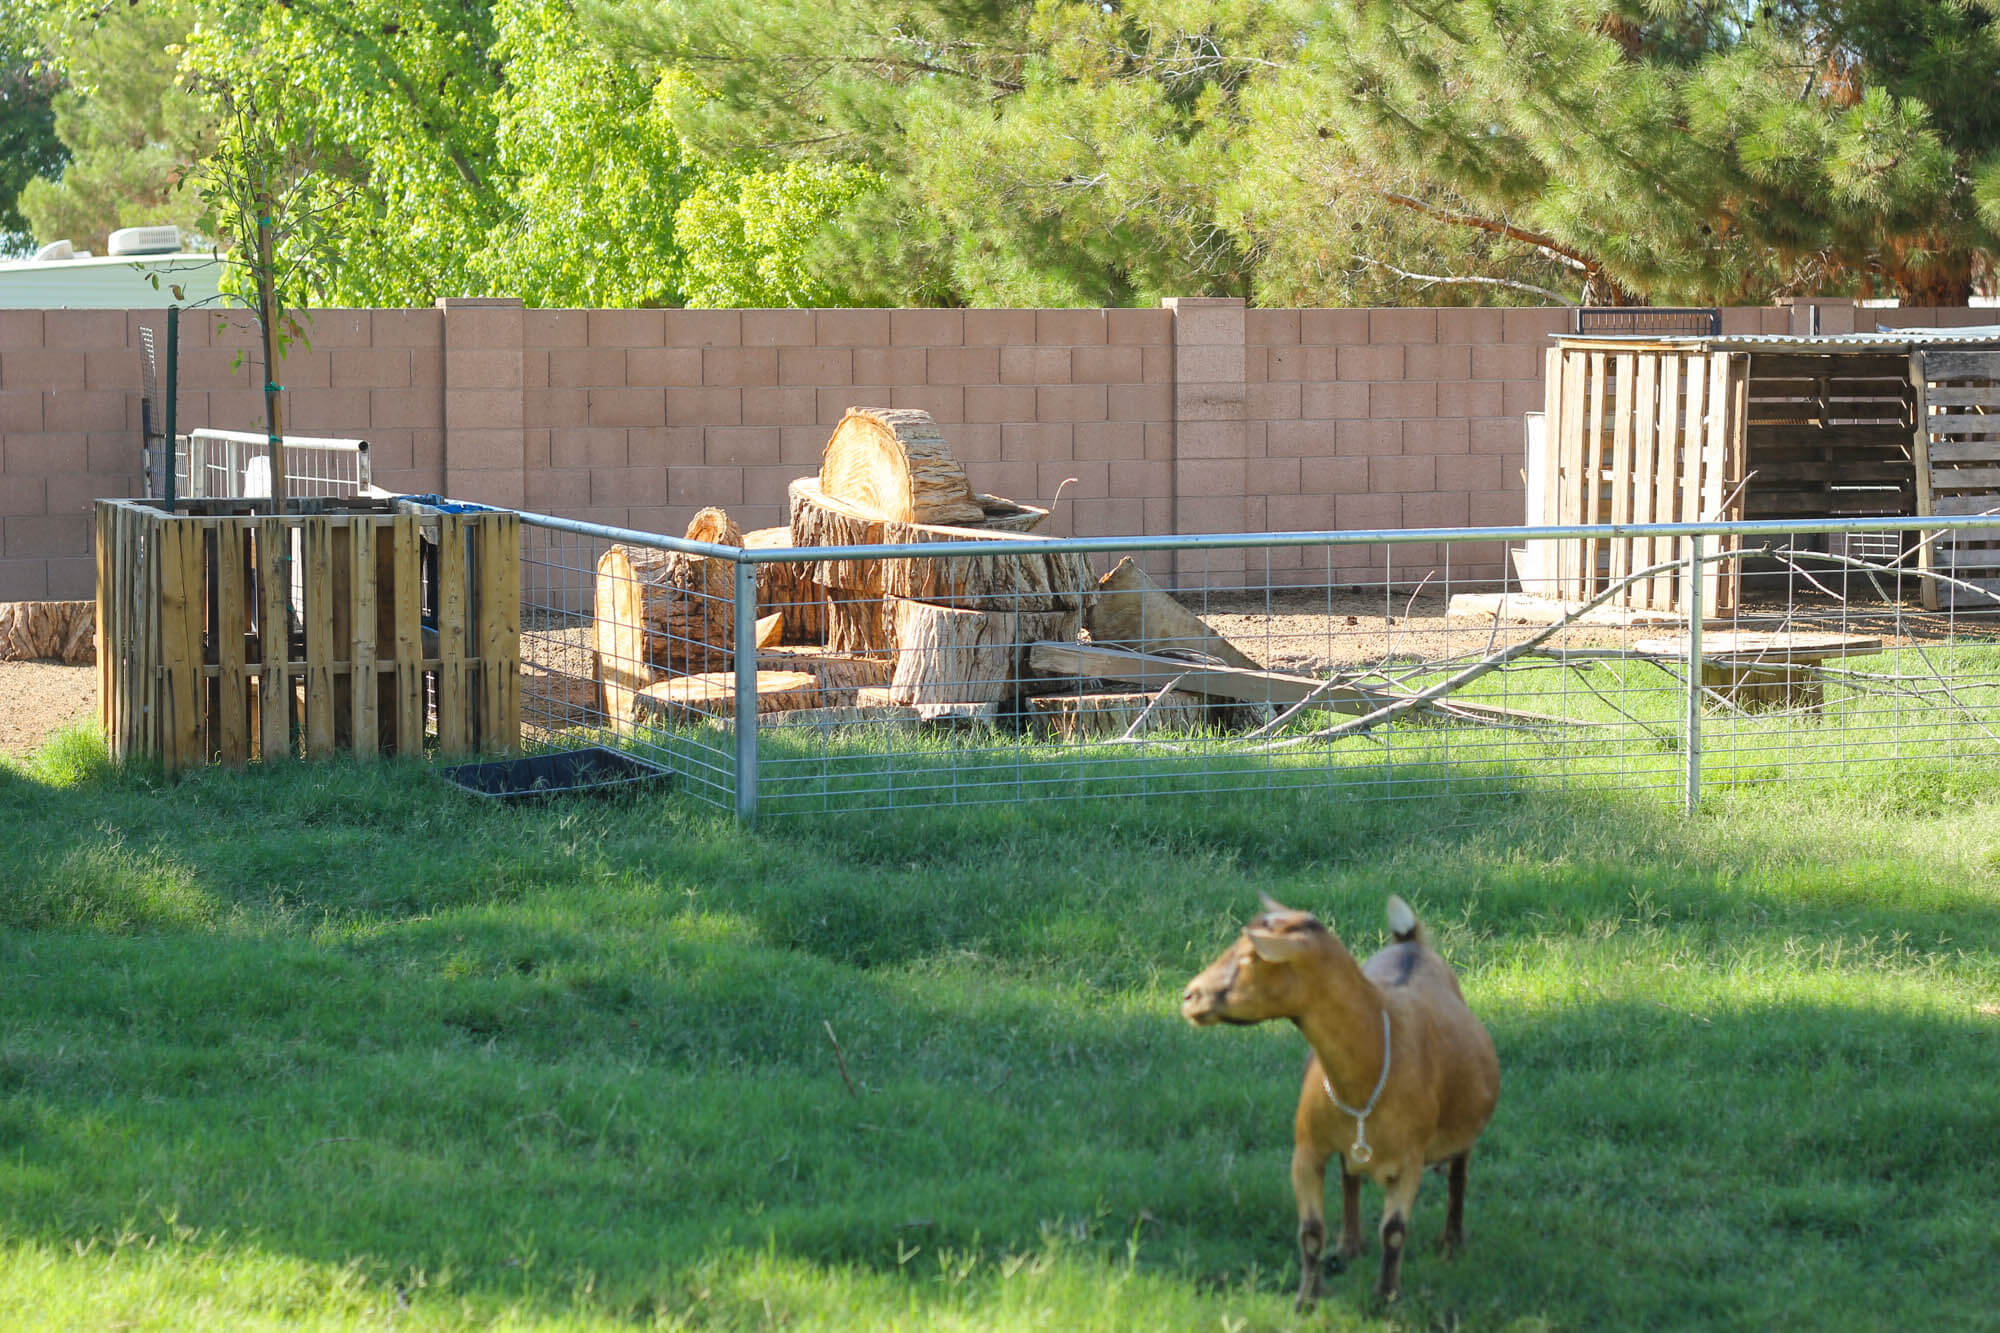 Building a goat pen - Weed 'em and Reap